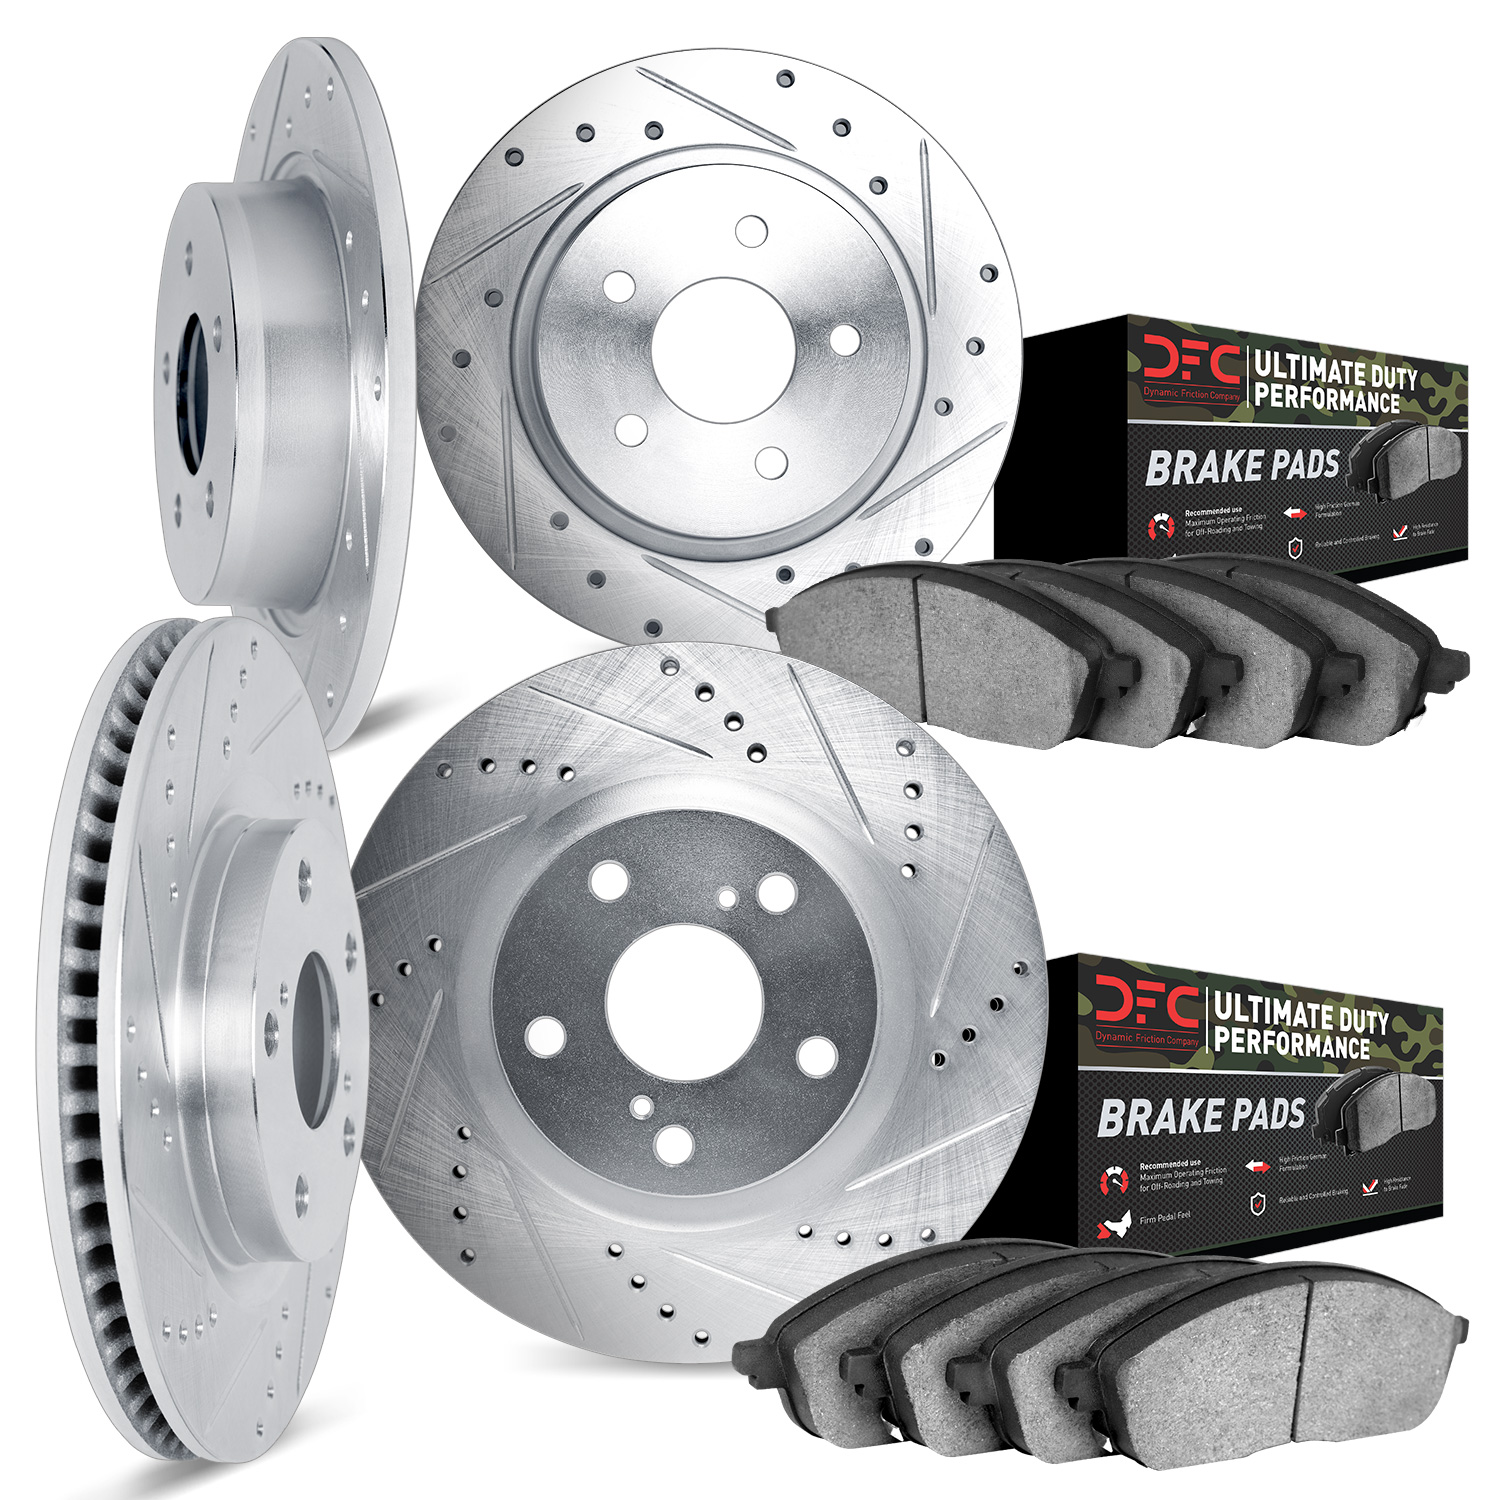 7404-42018 Drilled/Slotted Brake Rotors with Ultimate-Duty Brake Pads Kit [Silver], Fits Select Mopar, Position: Front and Rear